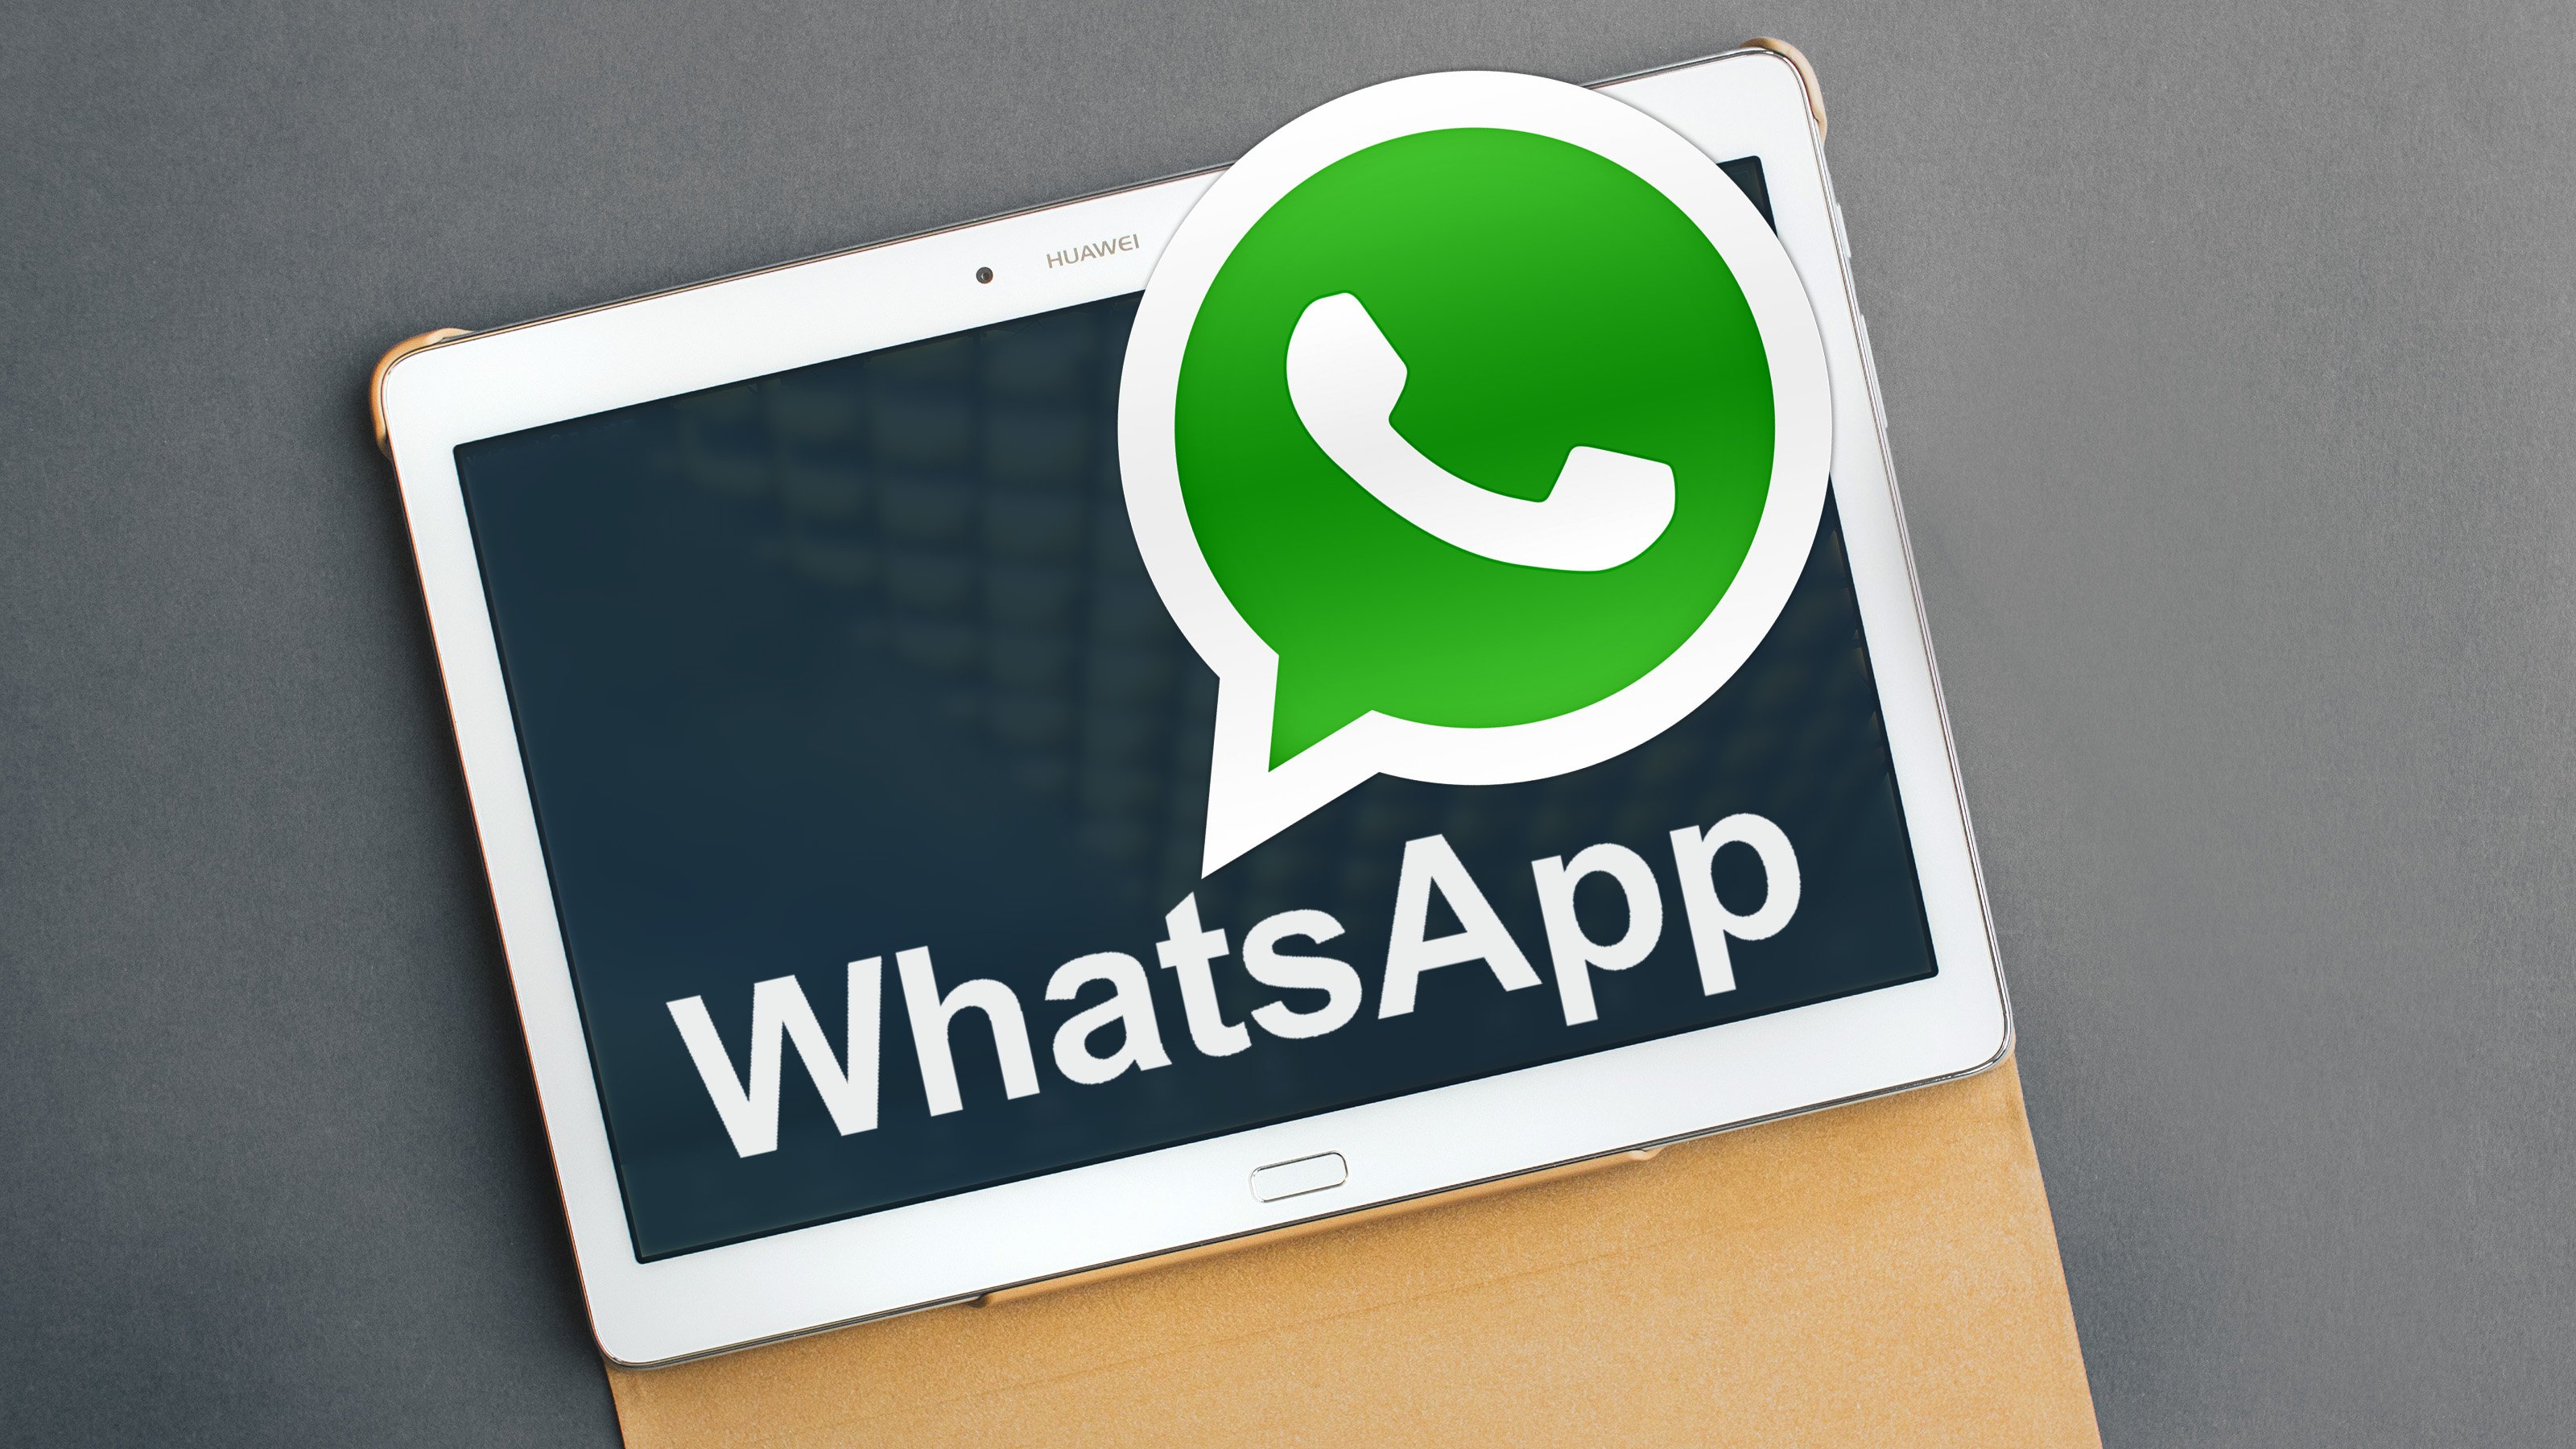 whatsapp for android tablet free download